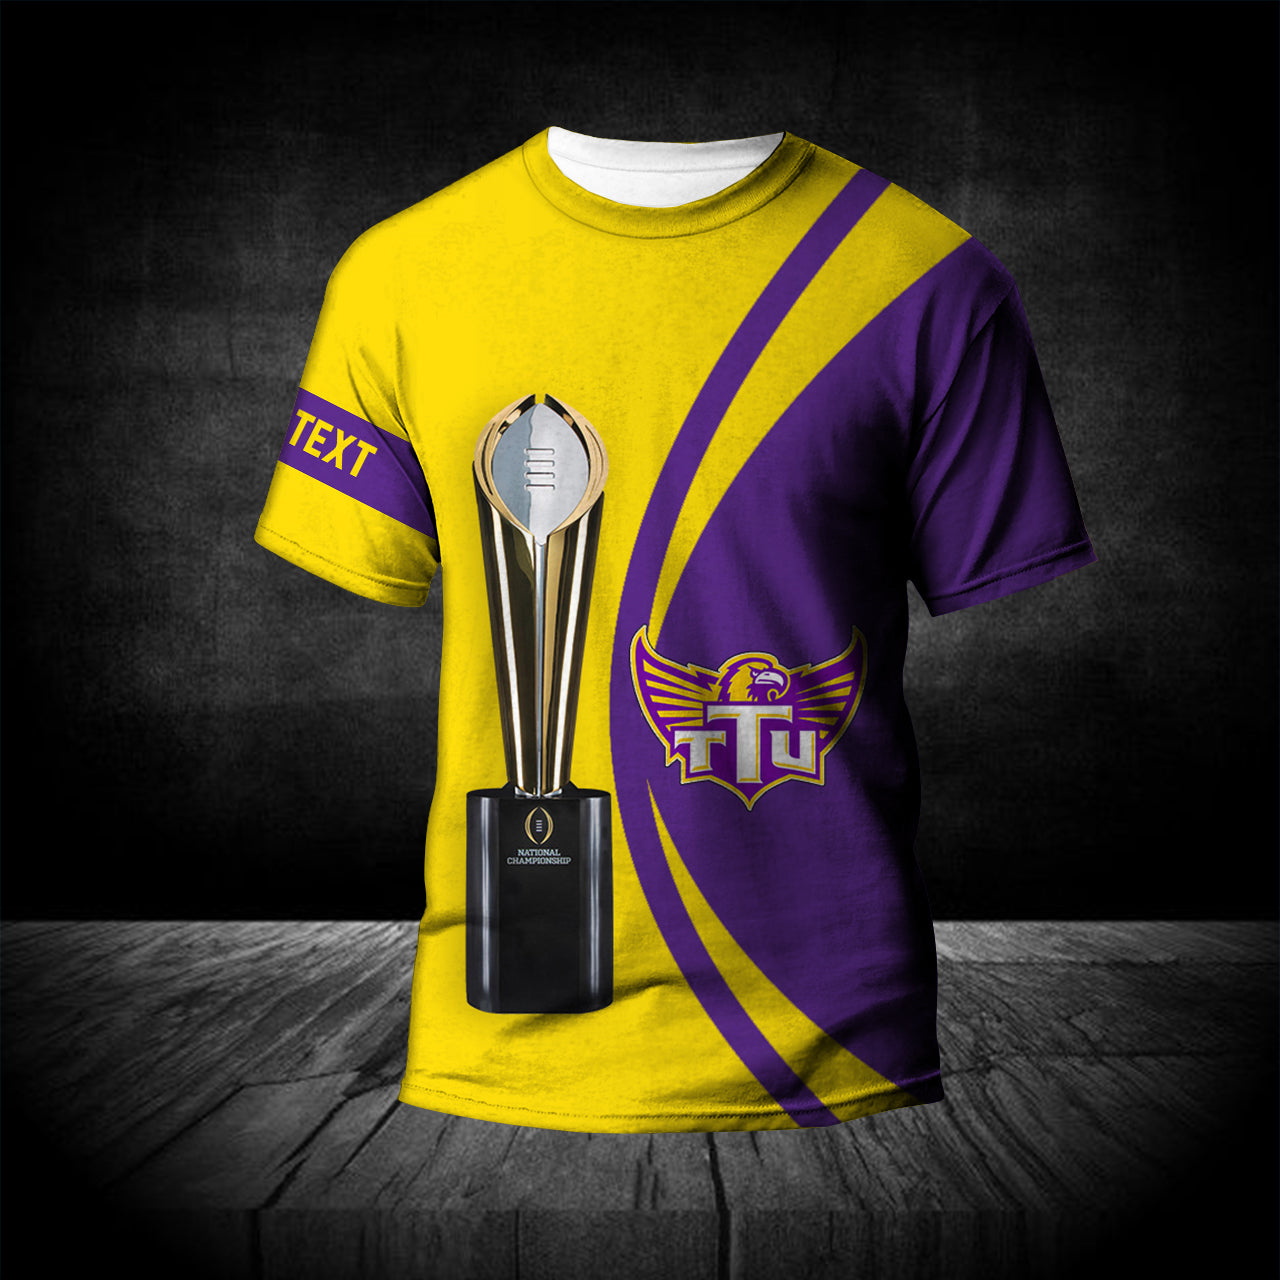 Tennessee Tech Golden Eagles T-Shirt and Polo Shirt Sport with the same ...